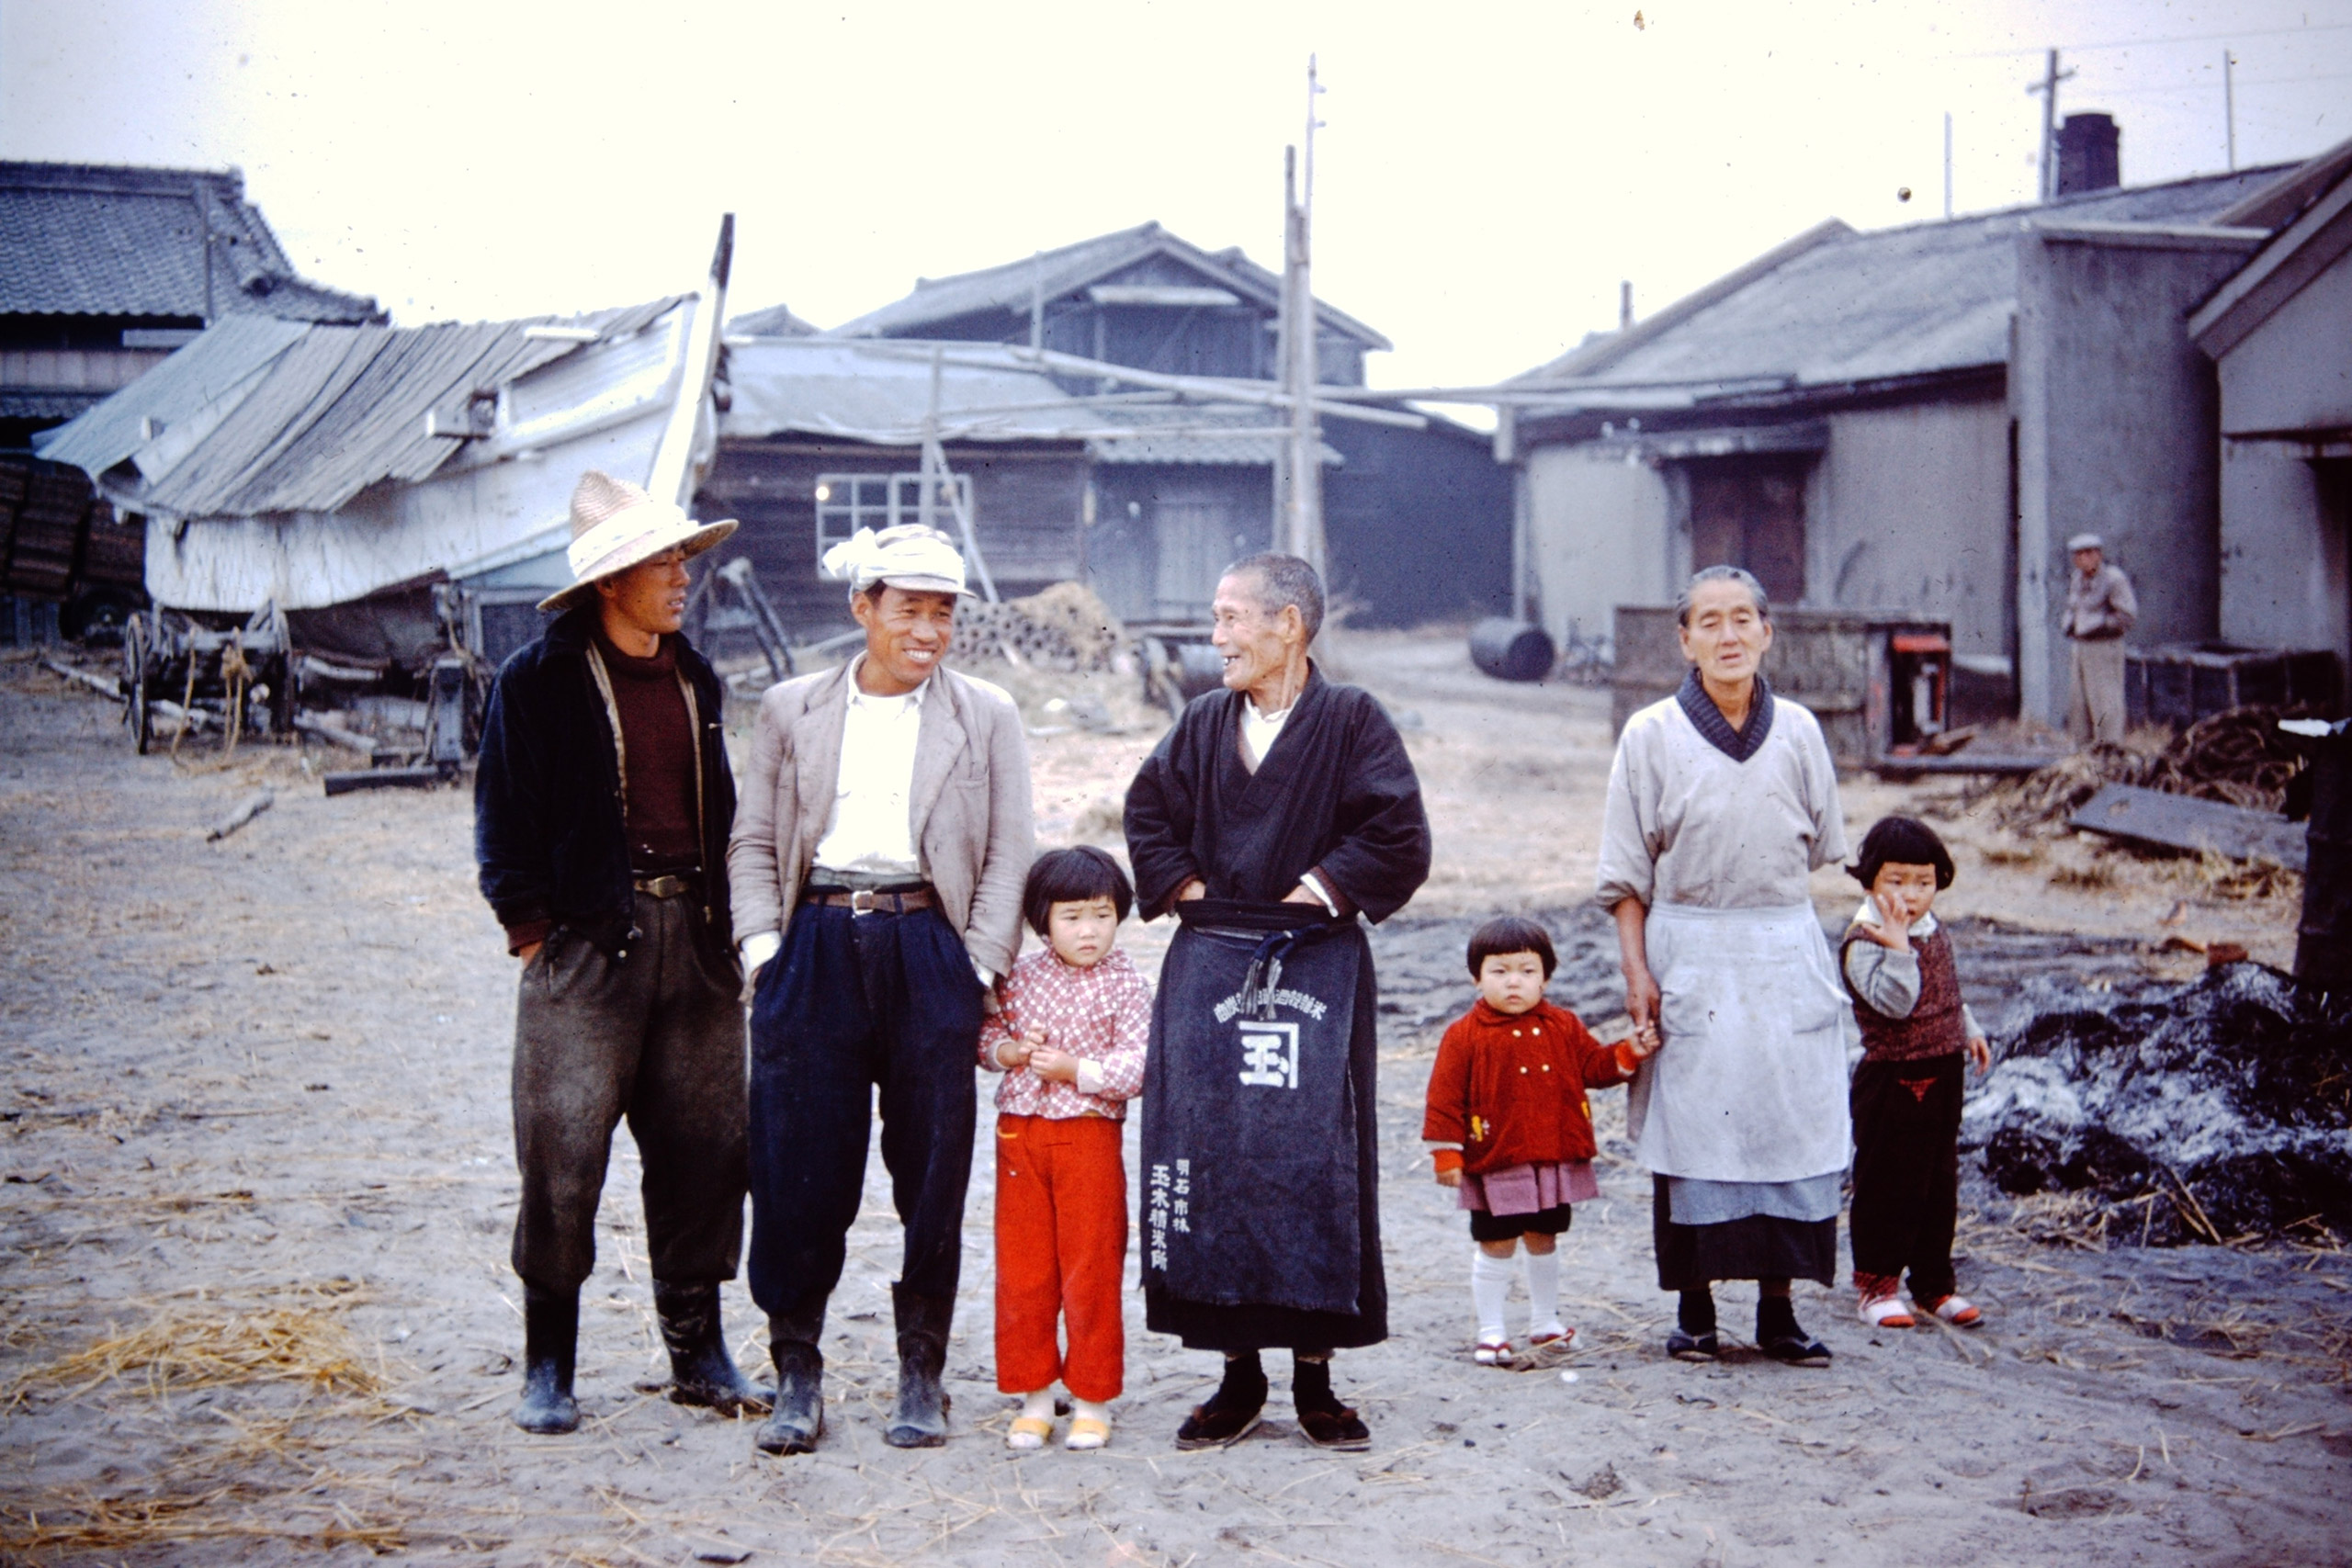 Personal photo by Dr. Andrew Weil in a small fishing village in Japan, 1959.